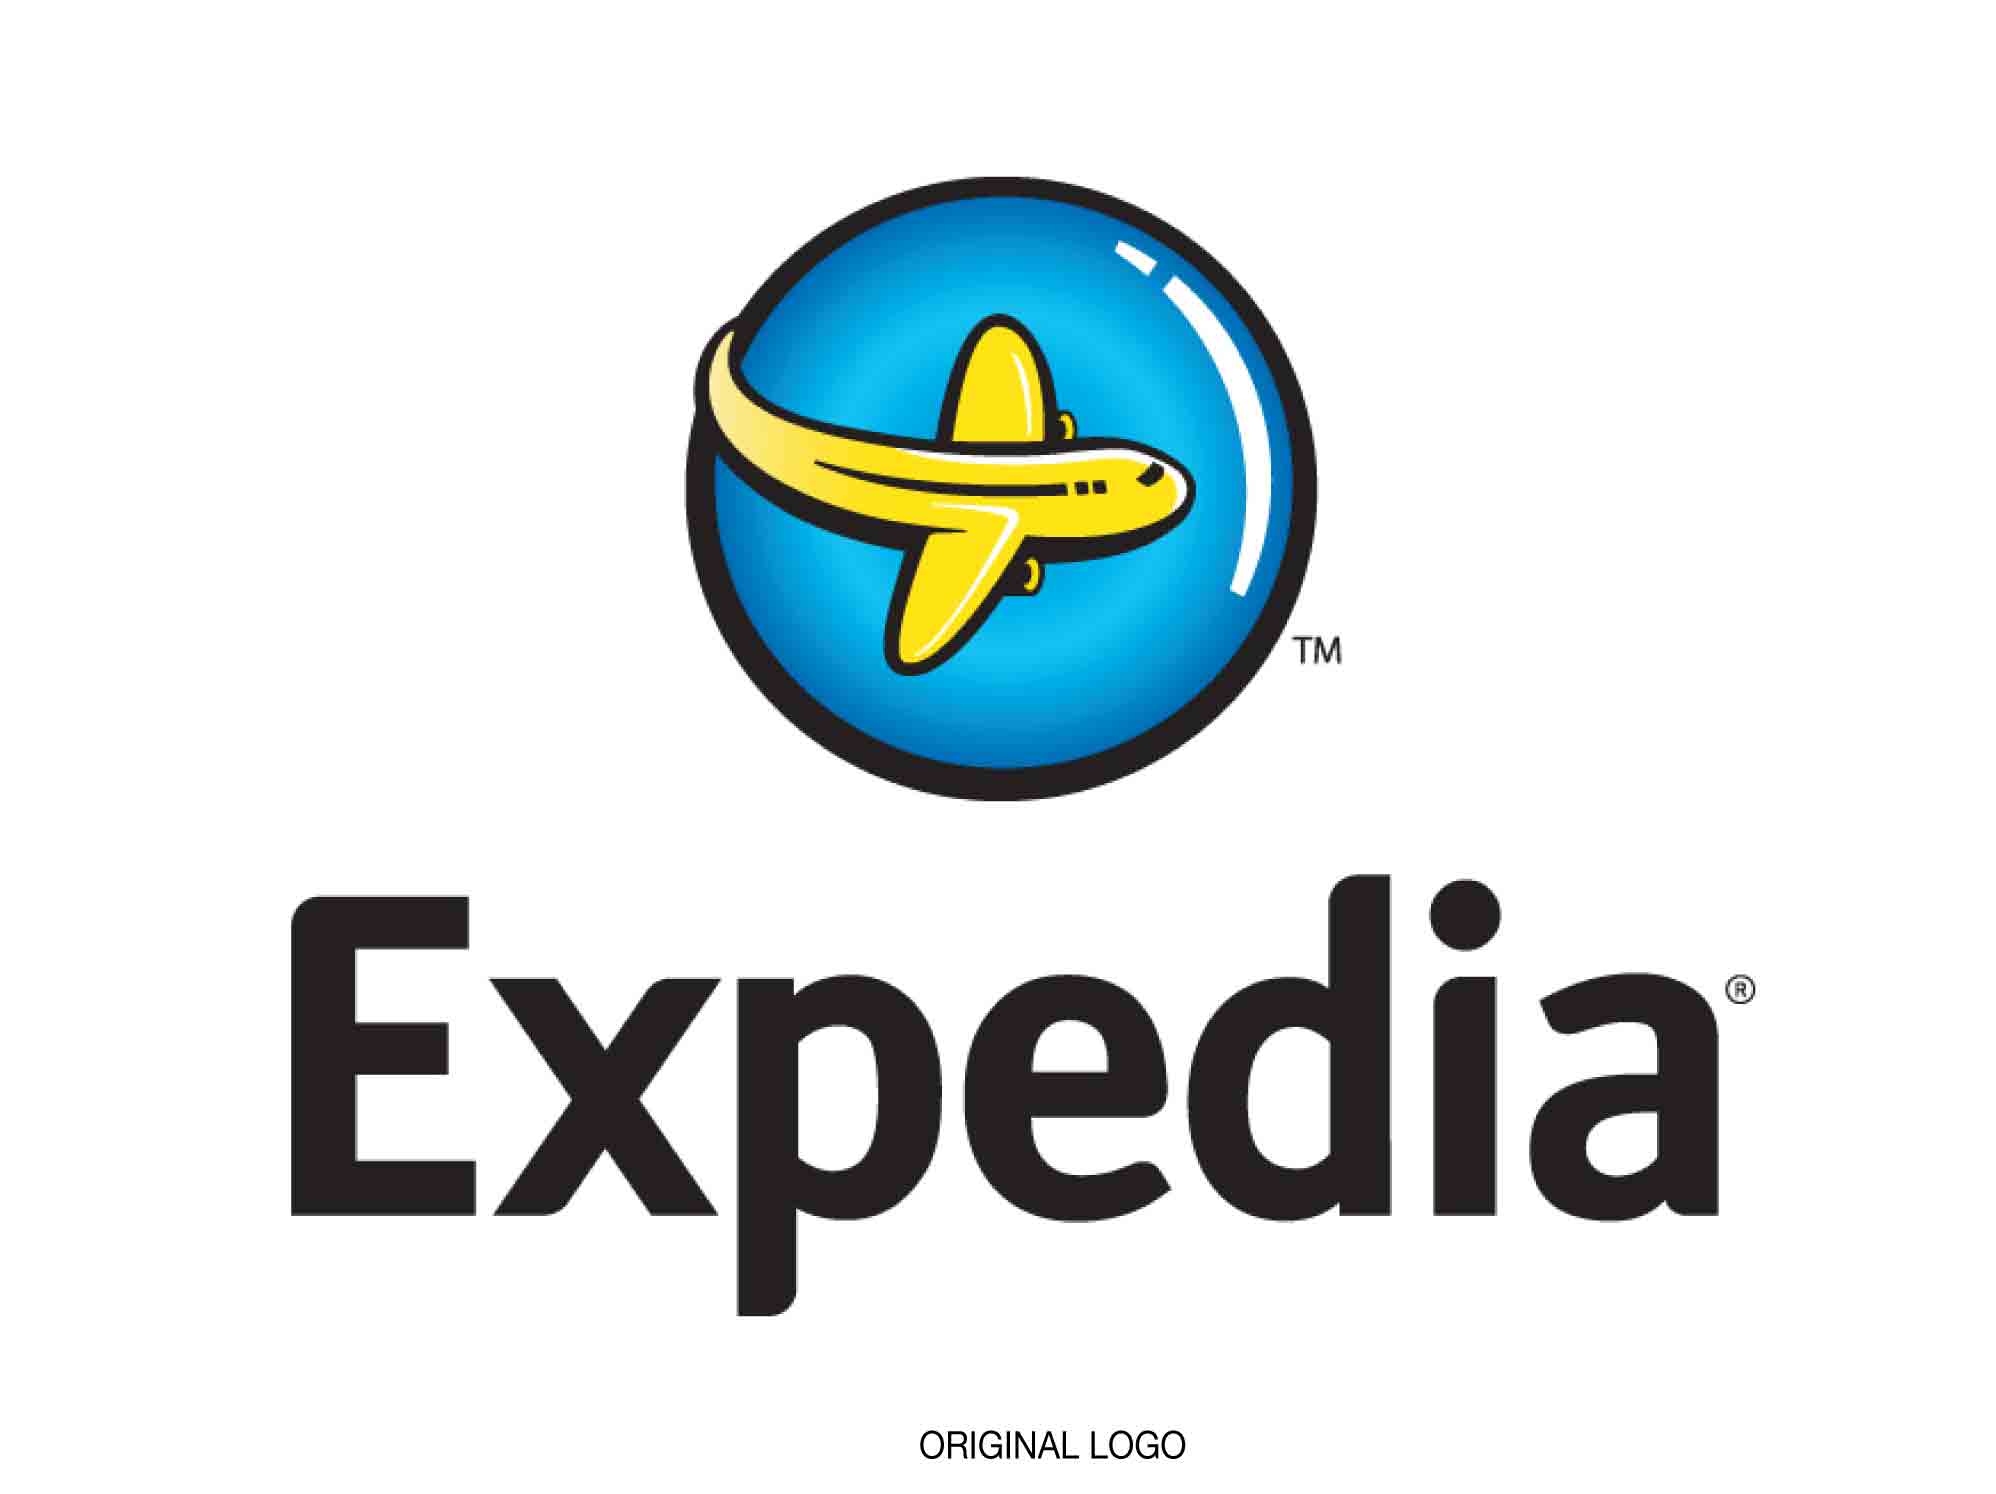 Expedia Group Logo - Expedia Repositions | Articles | LogoLounge